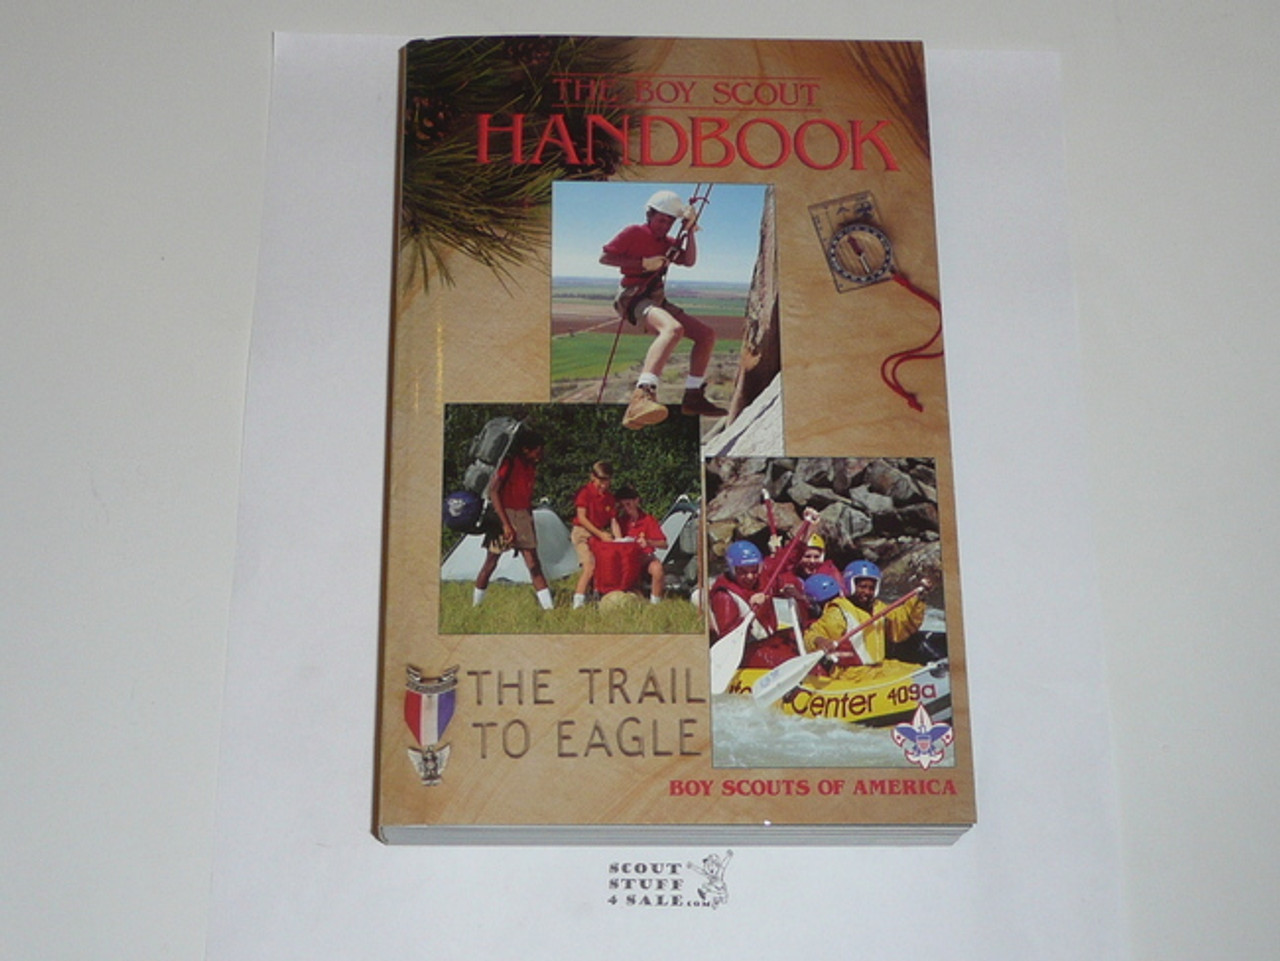 1992 Boy Scout Handbook, Tenth Edition, Fourth Printing, used condition